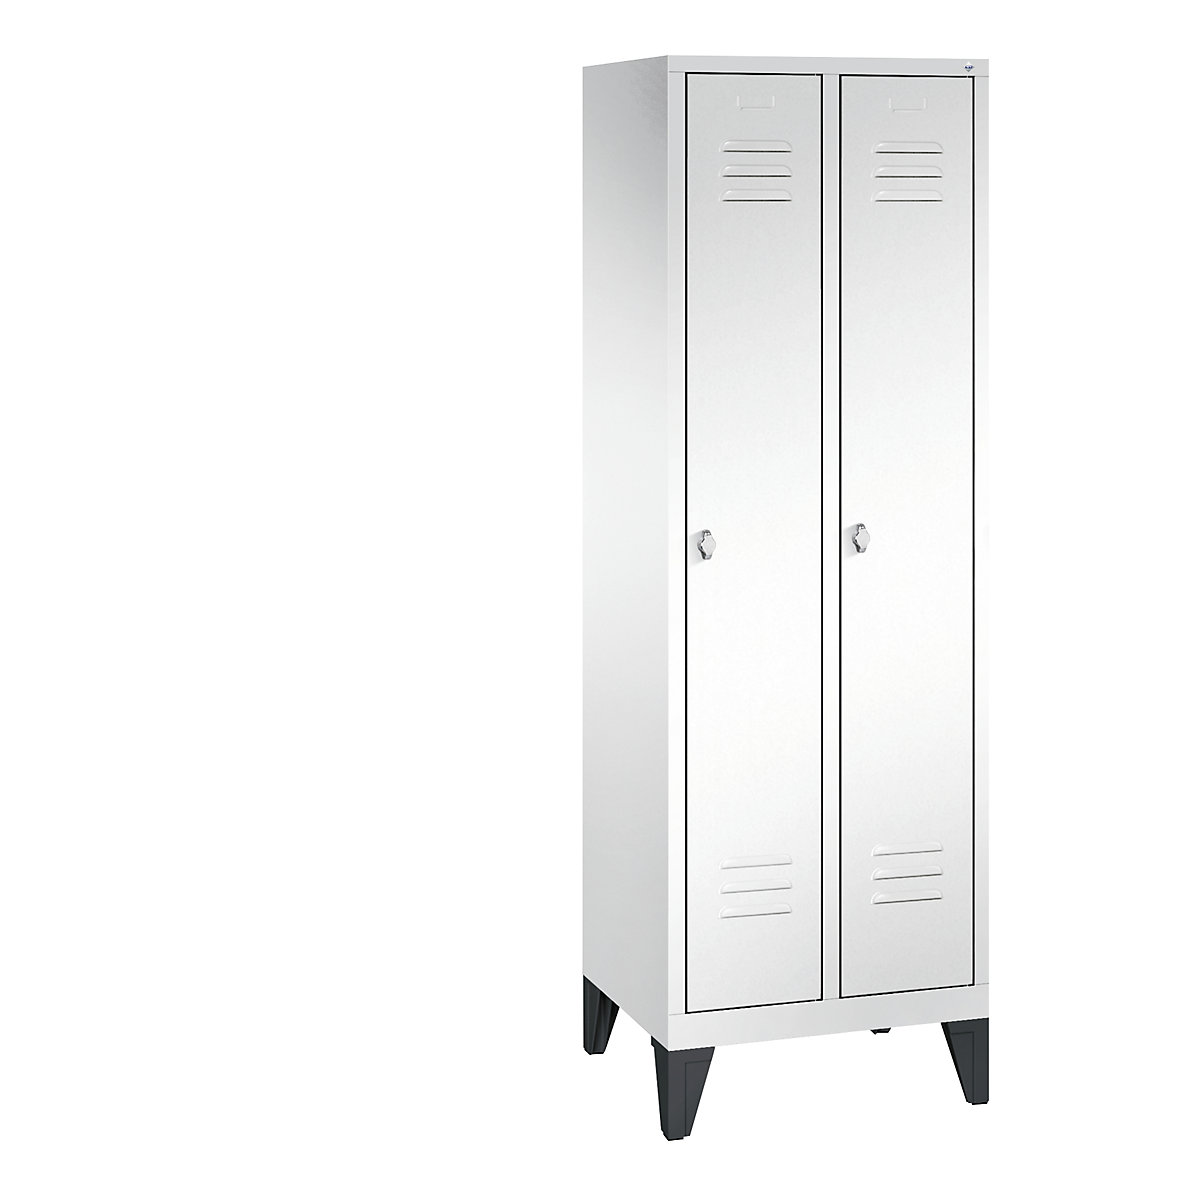 CLASSIC cloakroom locker with feet – C+P, 2 compartments, compartment width 300 mm, traffic white-4